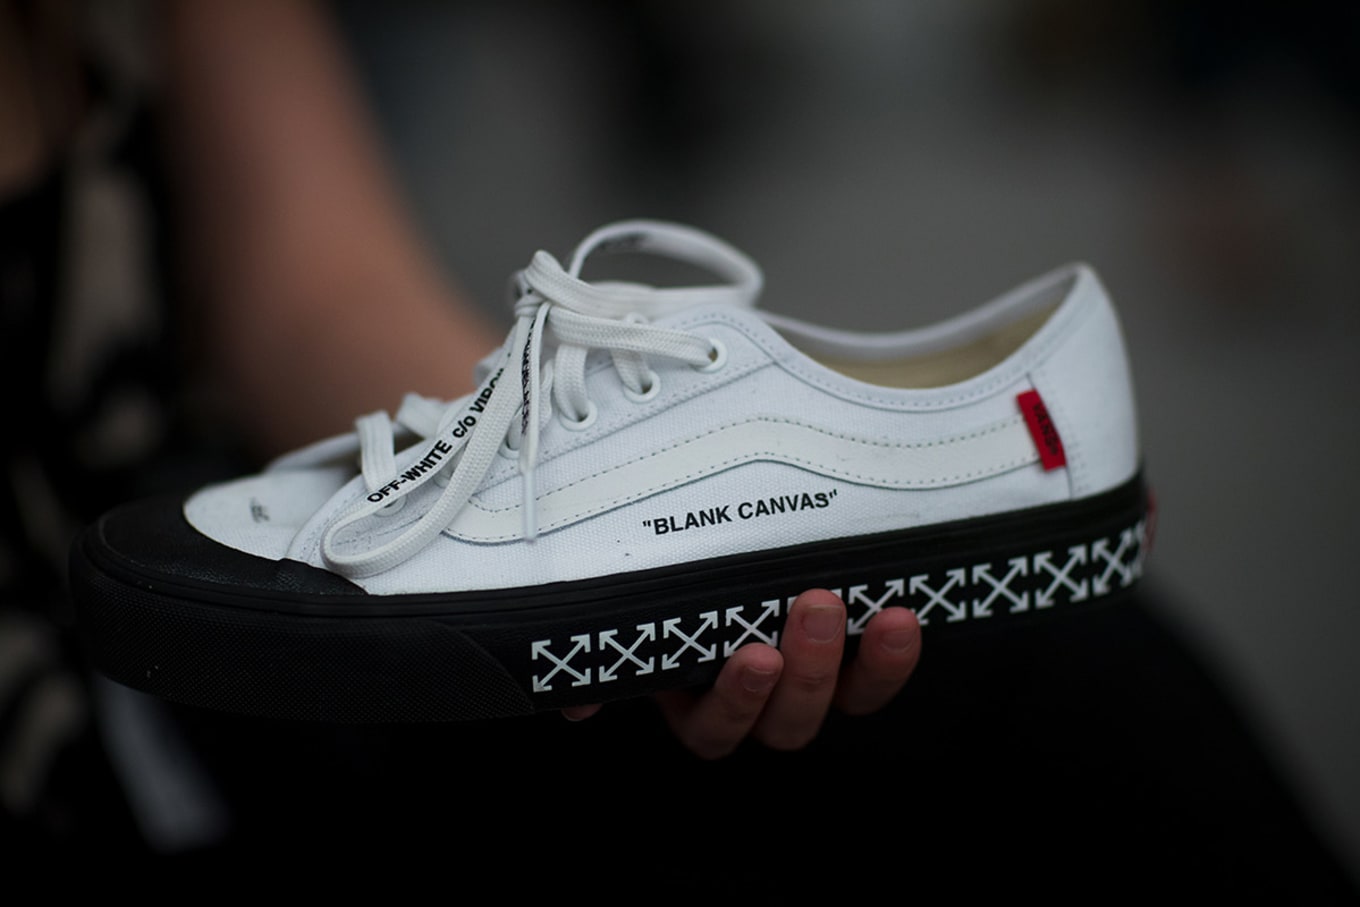 Off-White x Old Skool Date Sole Collector